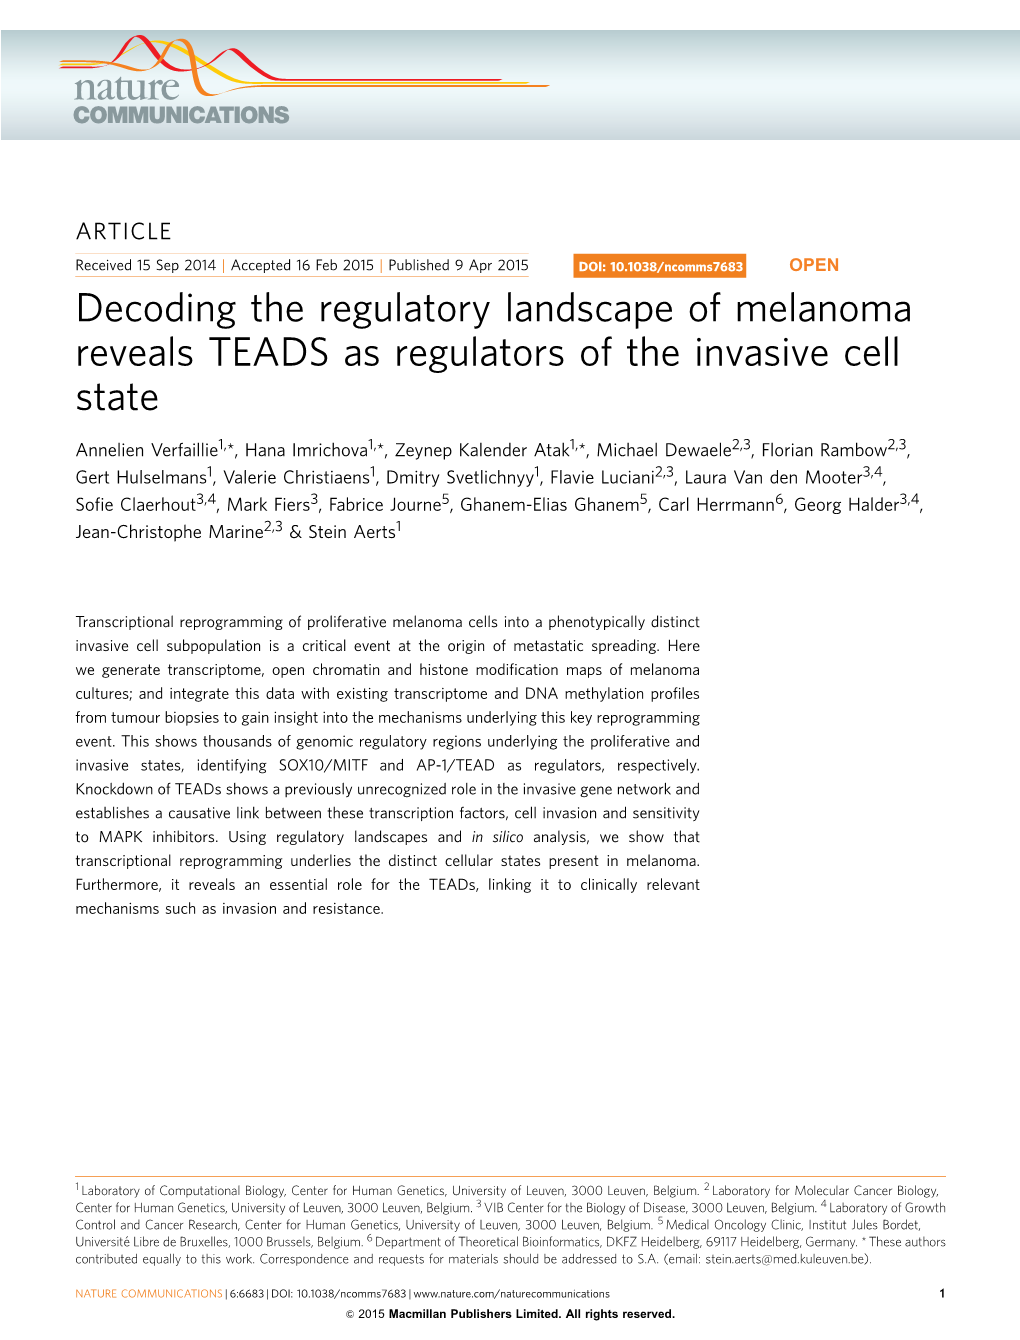 Decoding the Regulatory Landscape of Melanoma Reveals TEADS As Regulators of the Invasive Cell State